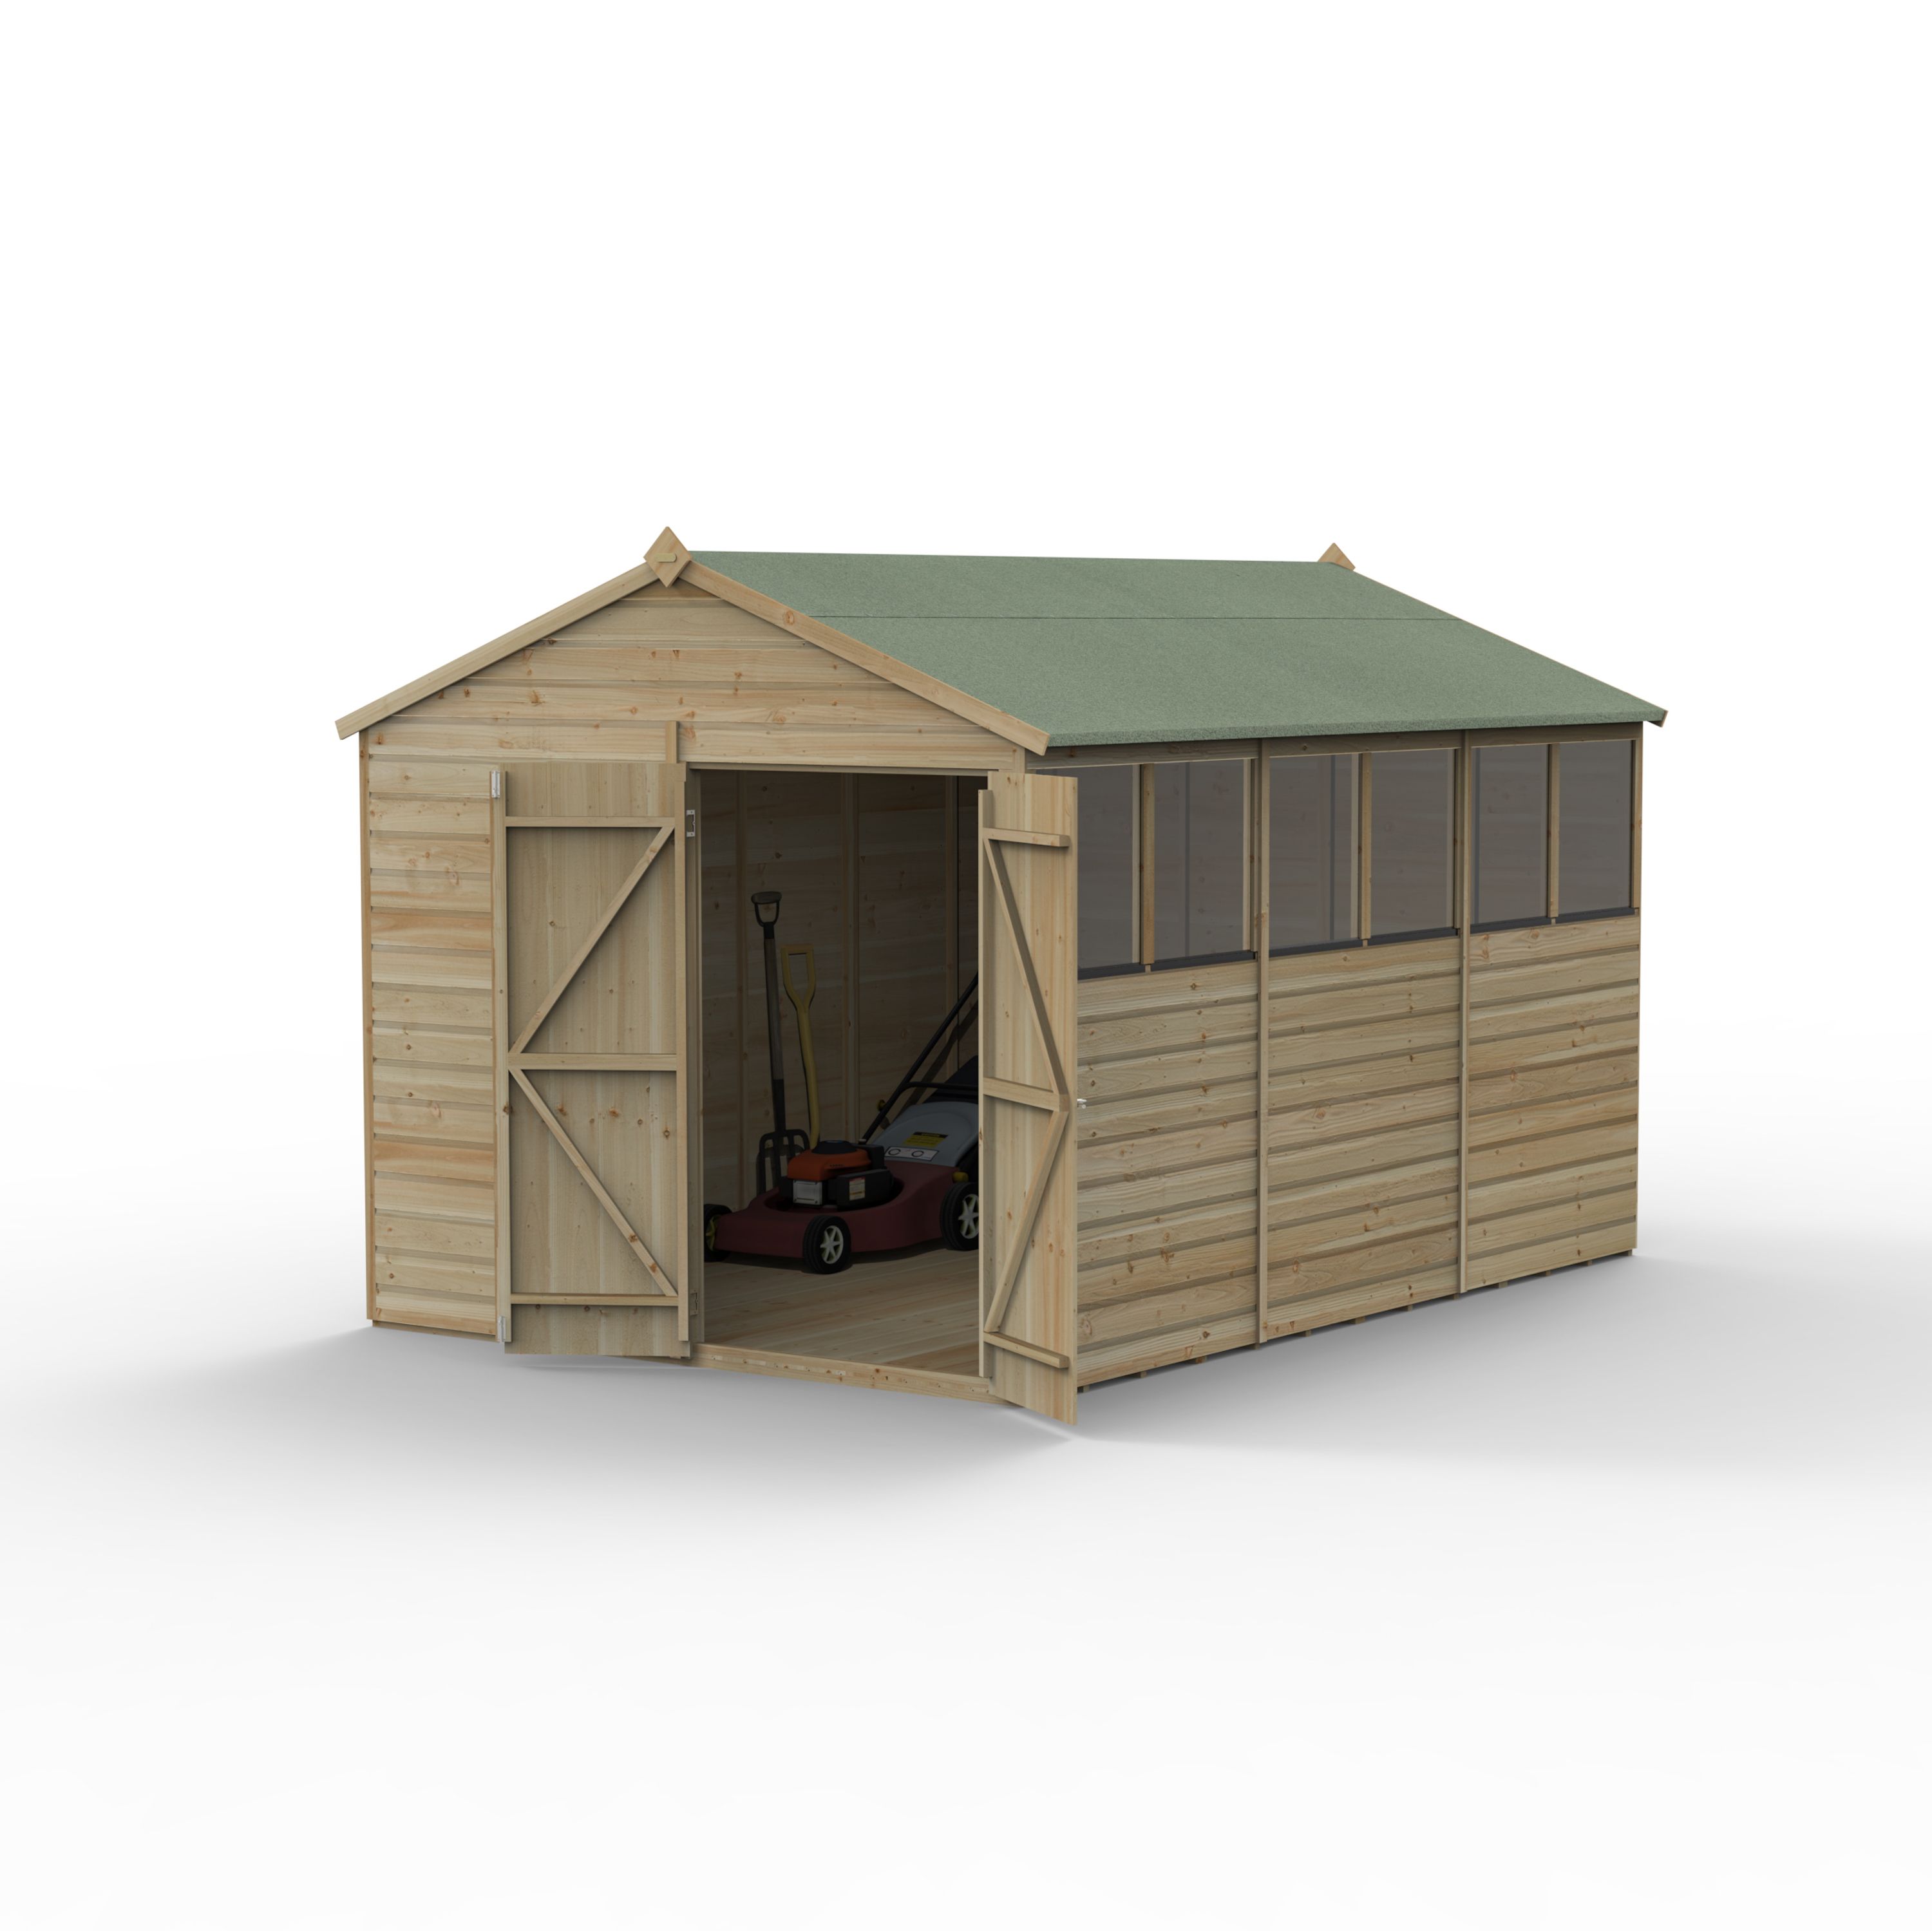 Forest Garden Beckwood 12x8 ft Apex Natural timber Wooden 2 door Shed with floor & 6 windows (Base included) - Assembly not required